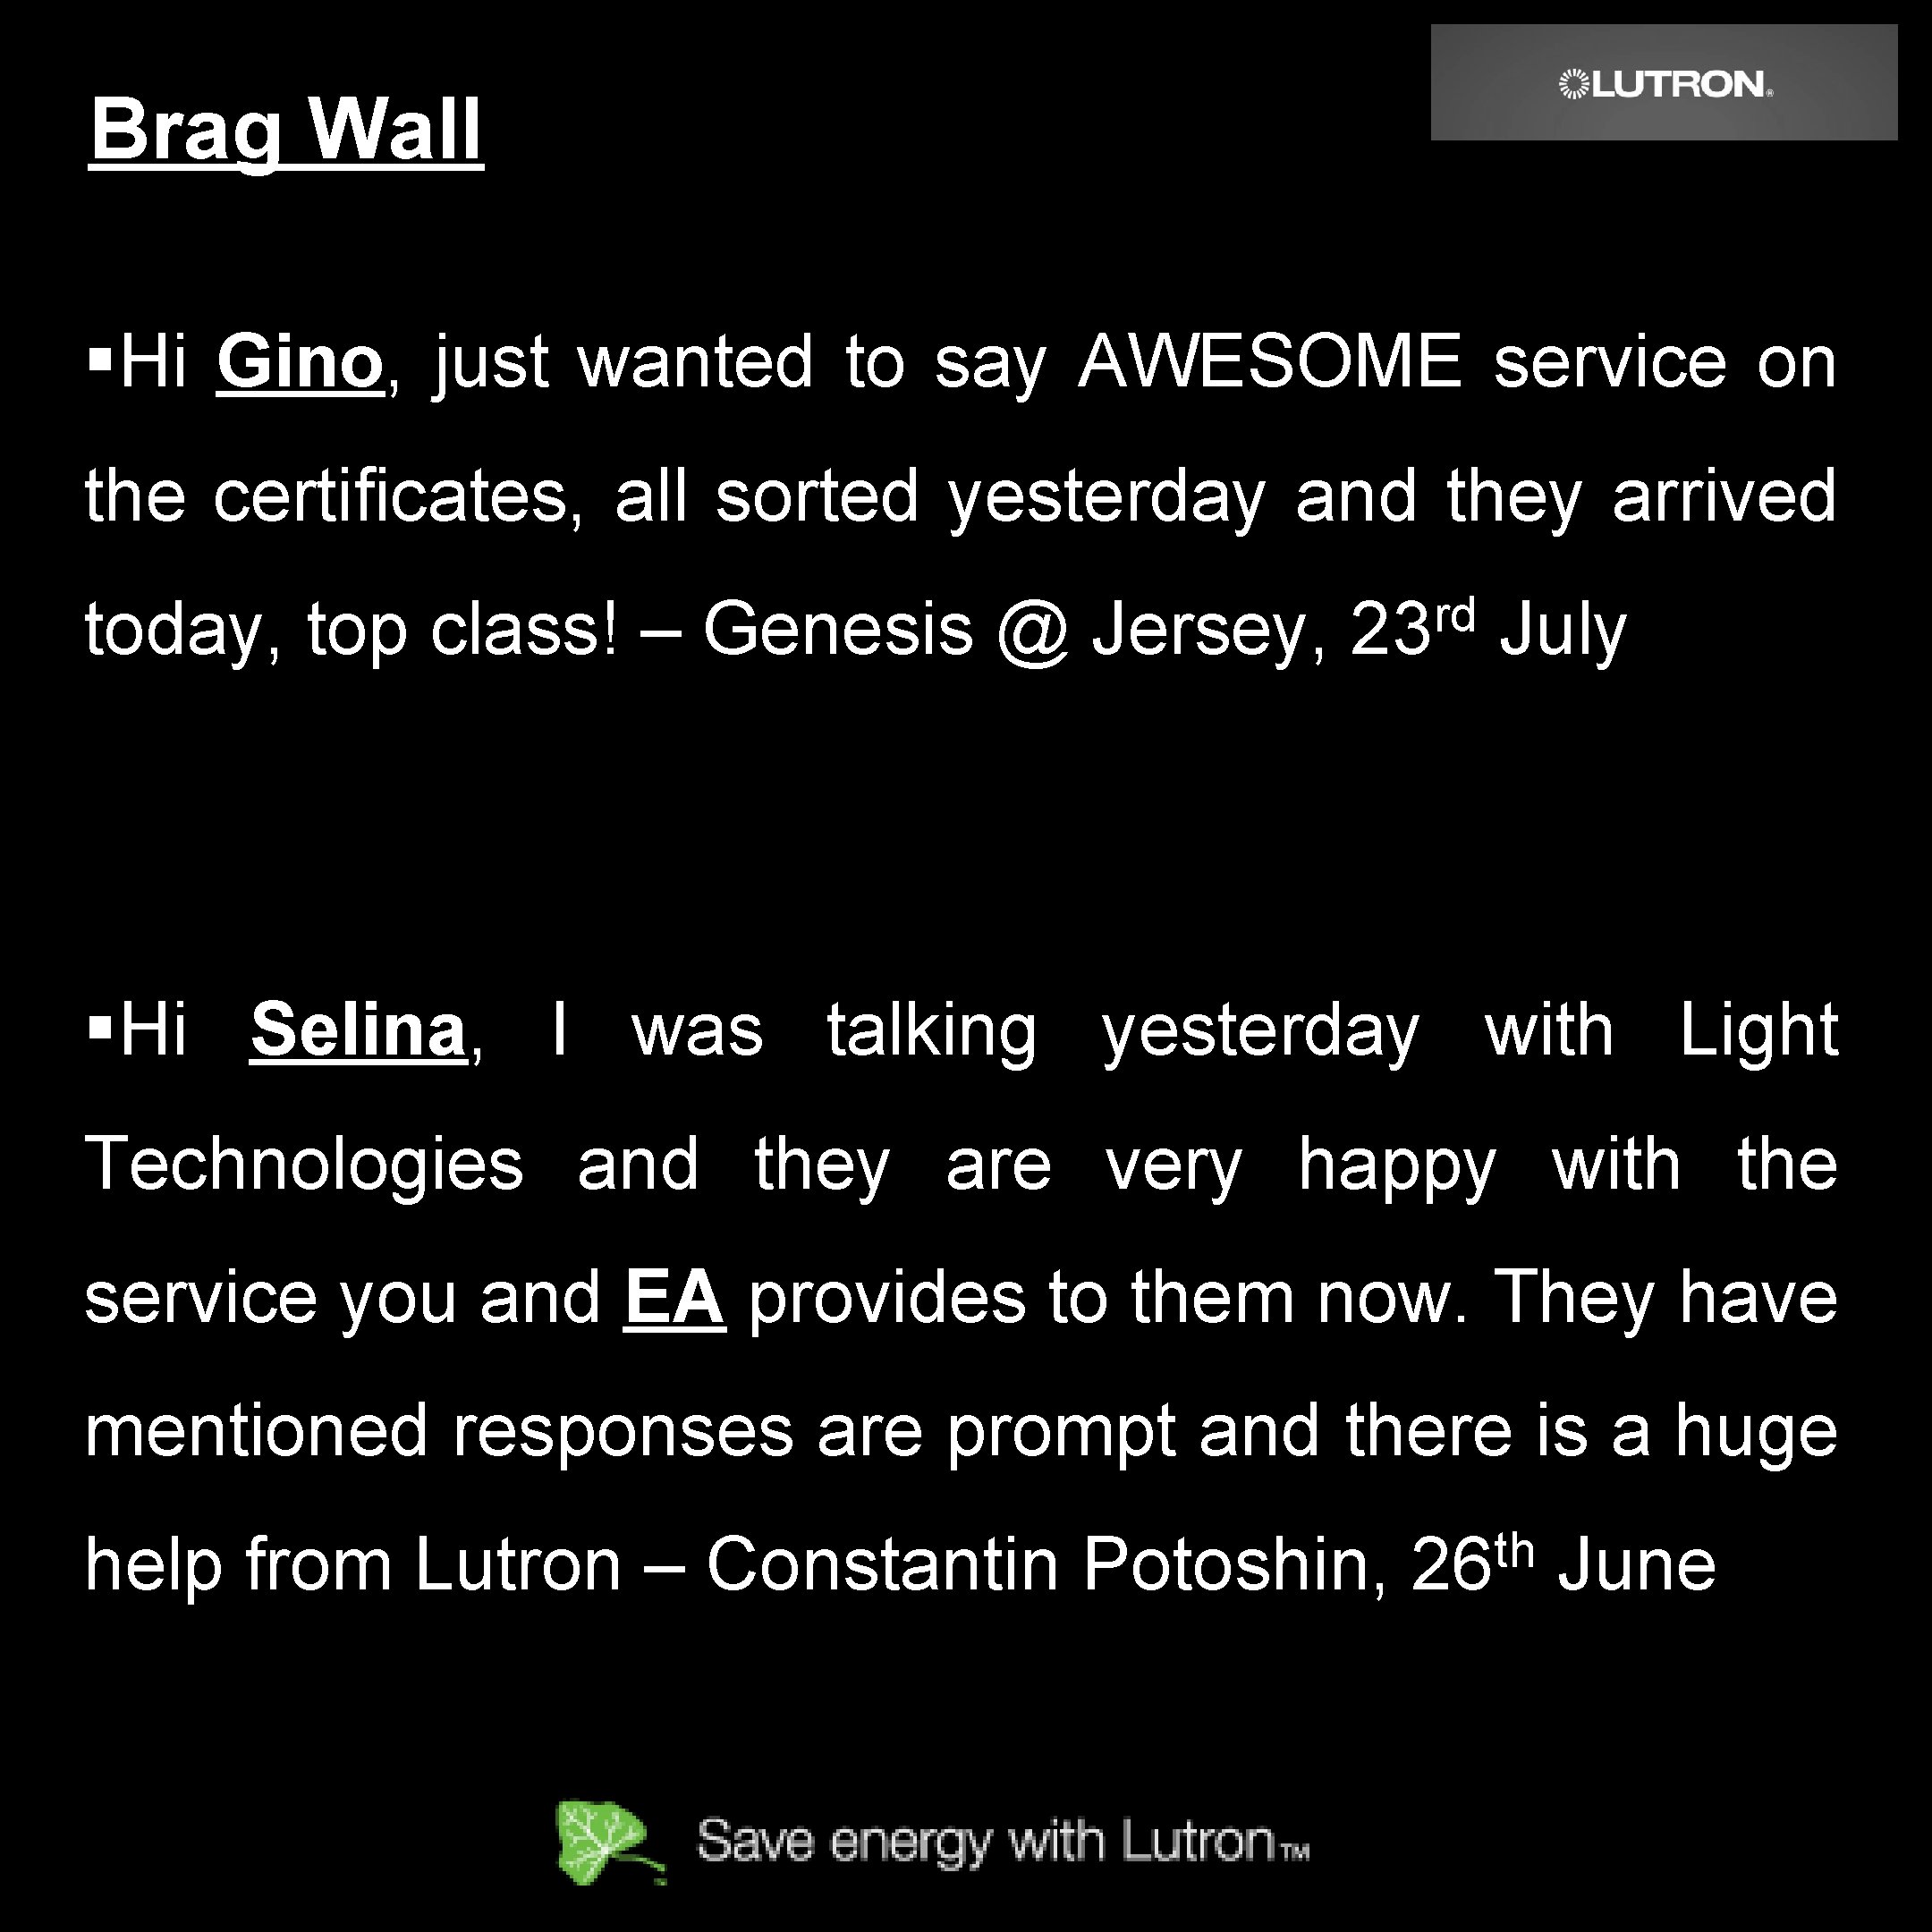 Brag Wall §Hi Gino, just wanted to say AWESOME service on the certificates, all